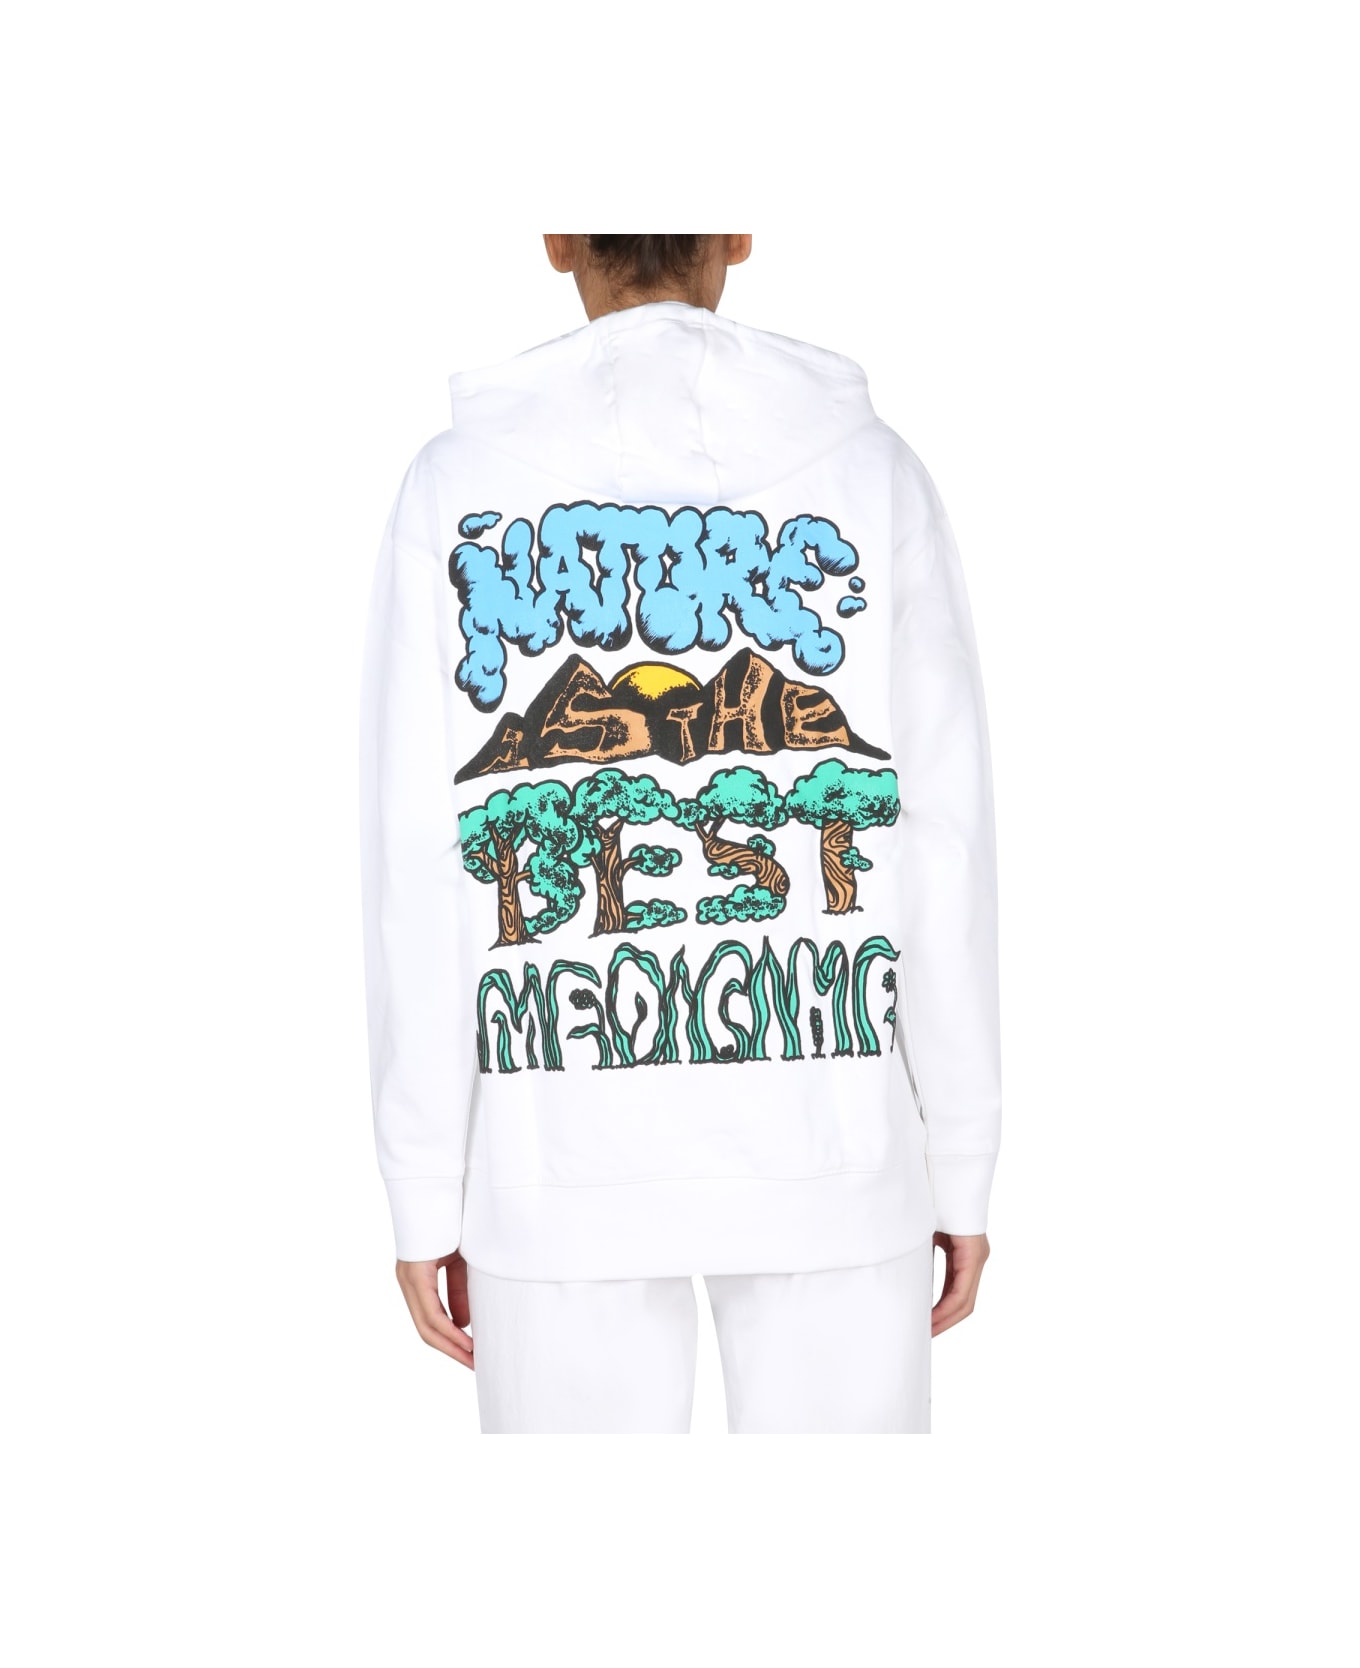 Market "nature Is The Best Medicine" T-shirt - WHITE